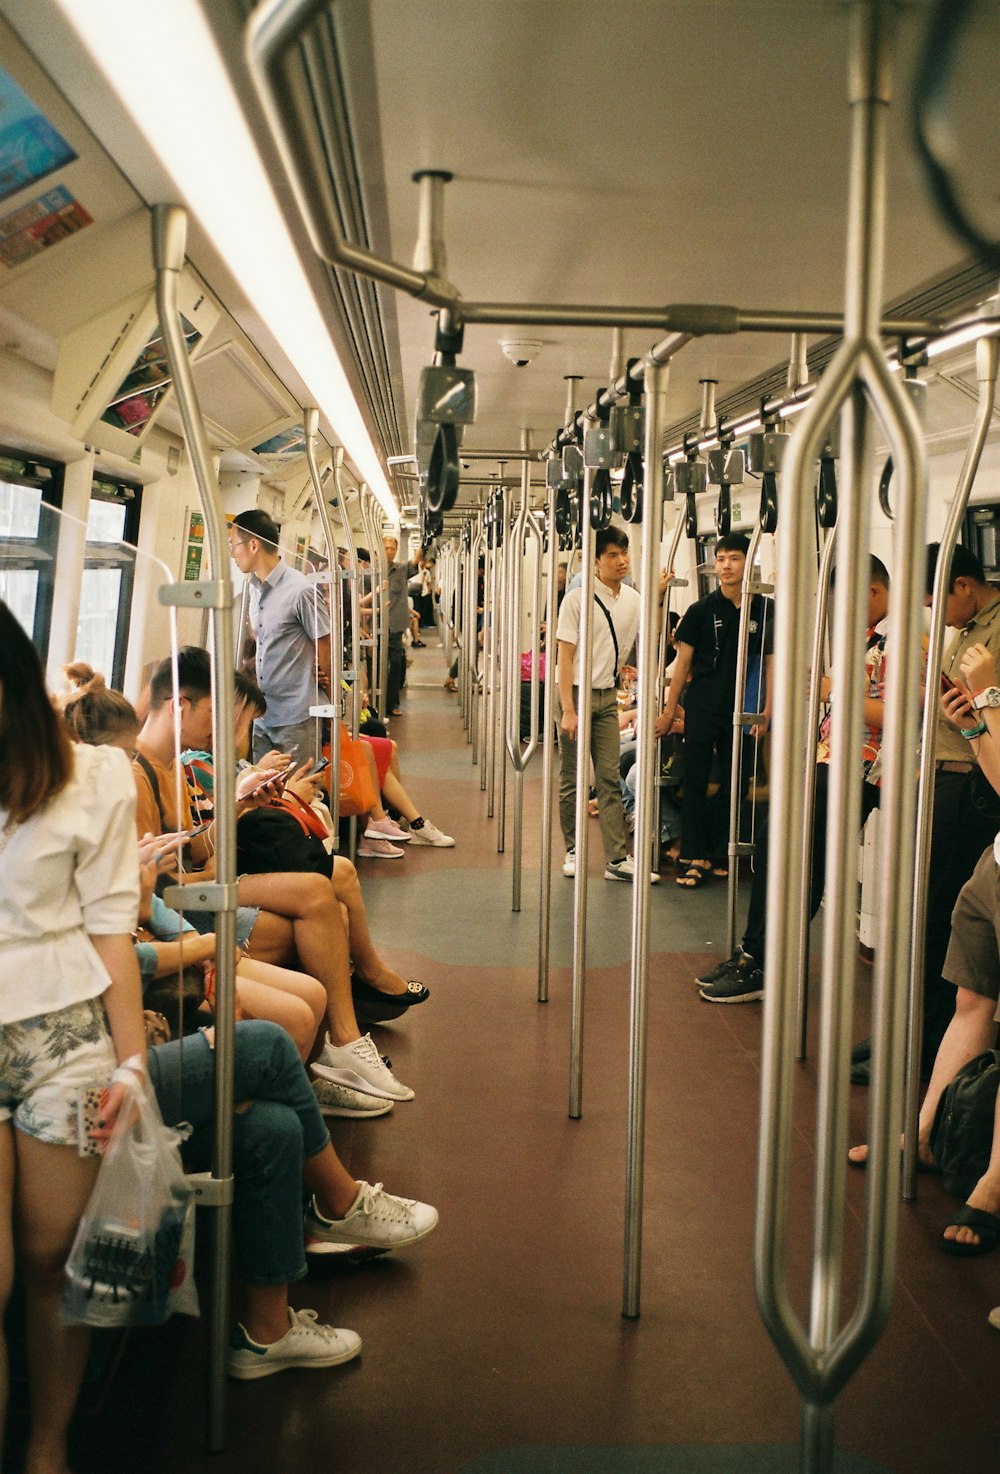 people sitting and others are standing inside train